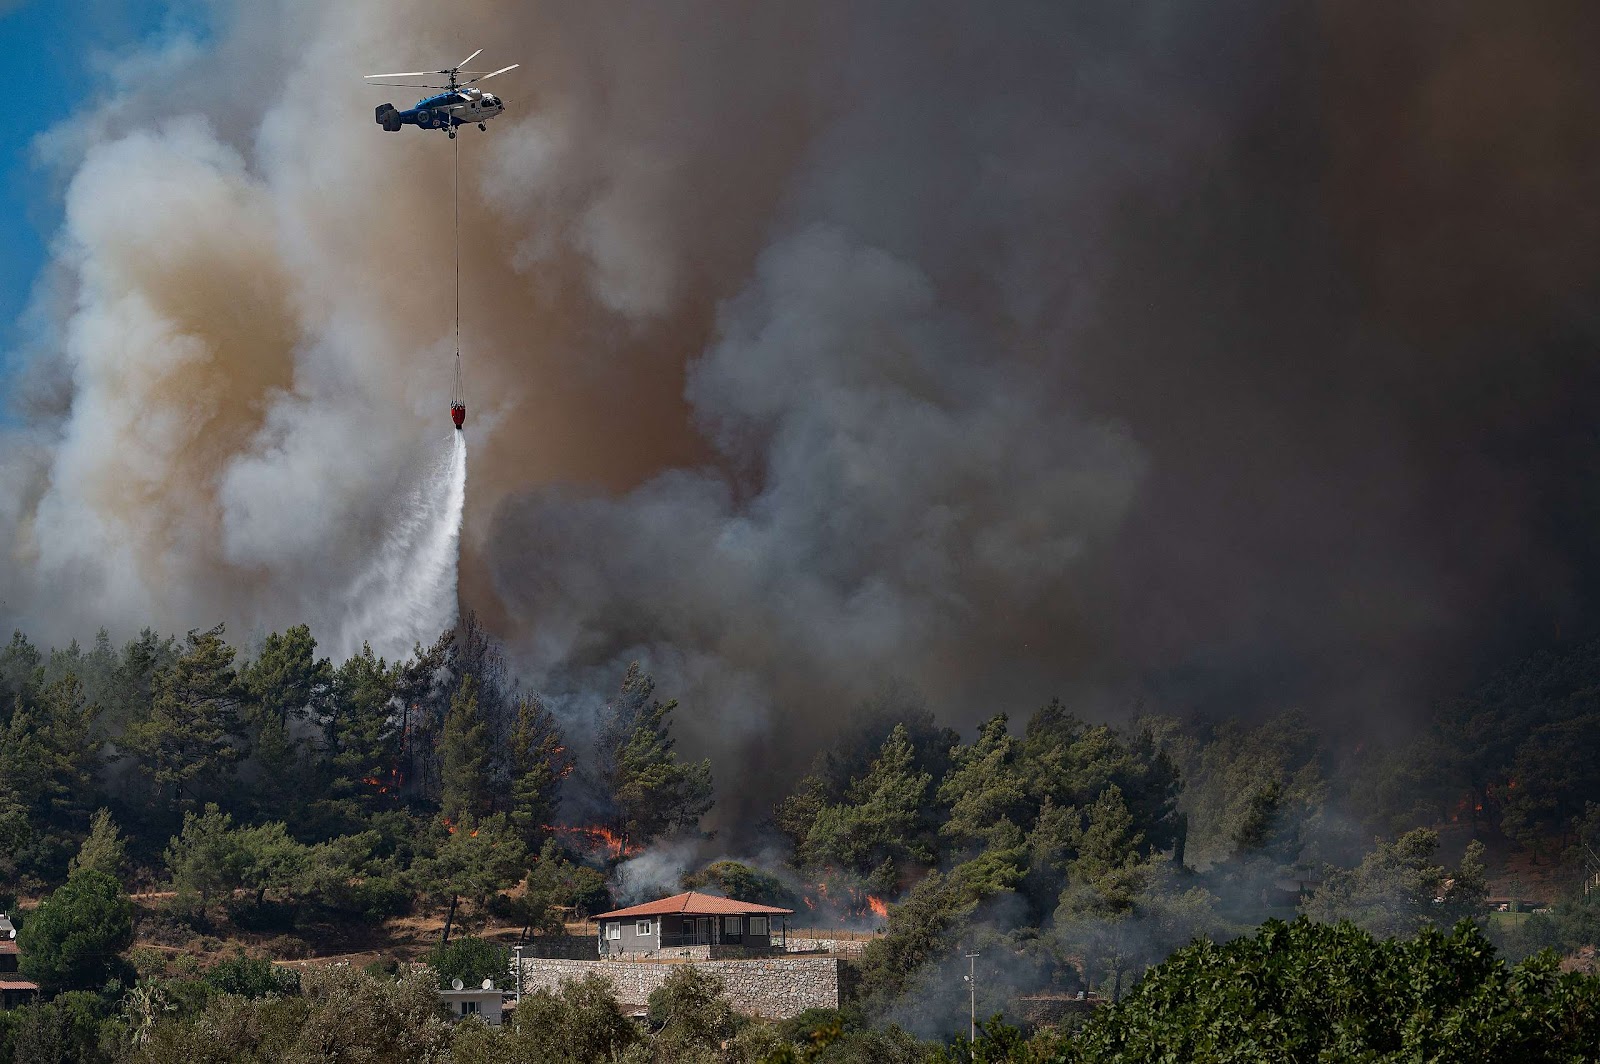 A firefighting helicopter drops water on a wildfire on August 2, 2021 near Marmaris, Turkey.